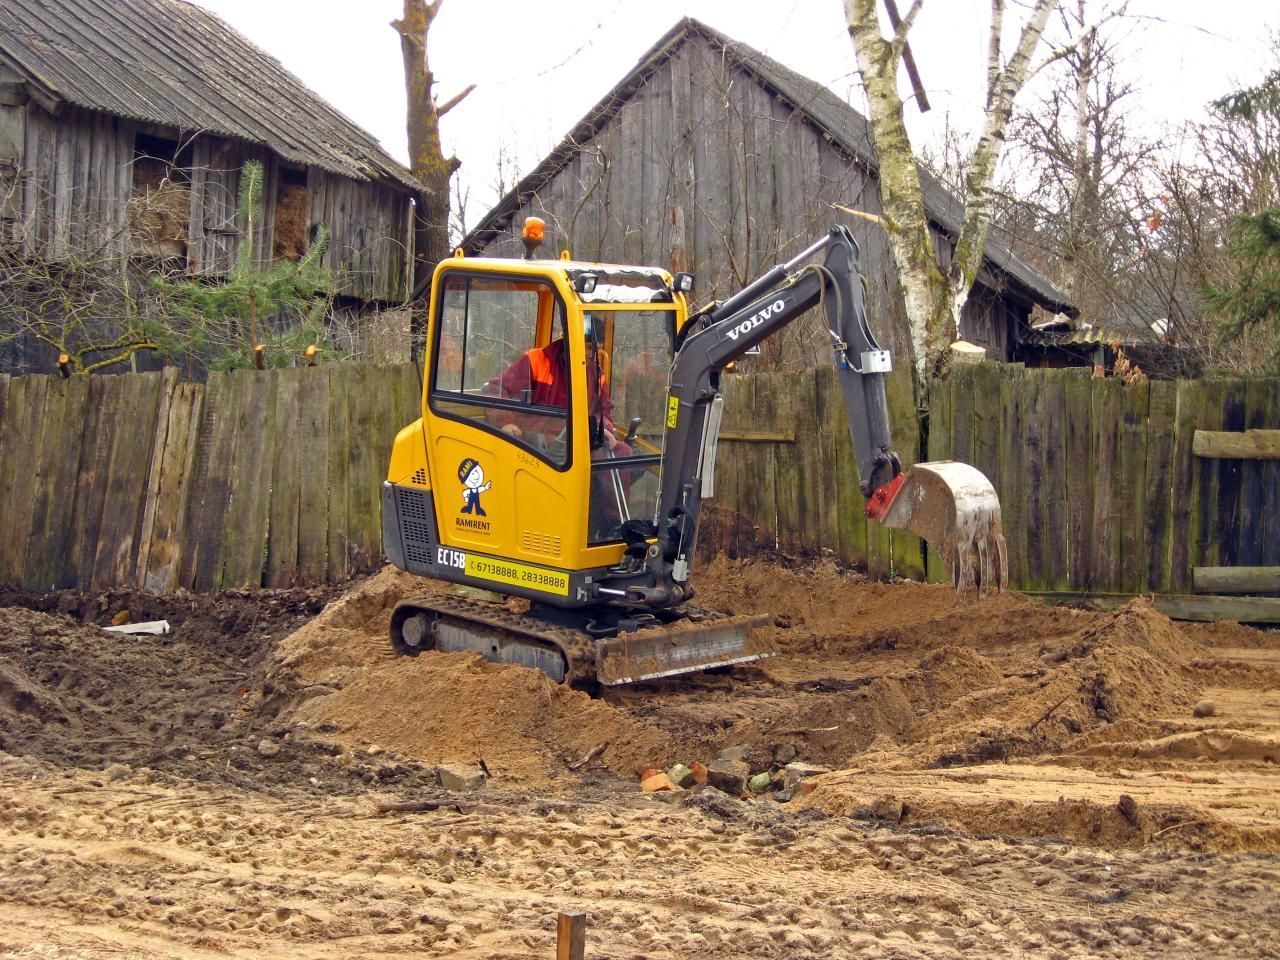 A yellow excavator is digging a hole in a dirt field.